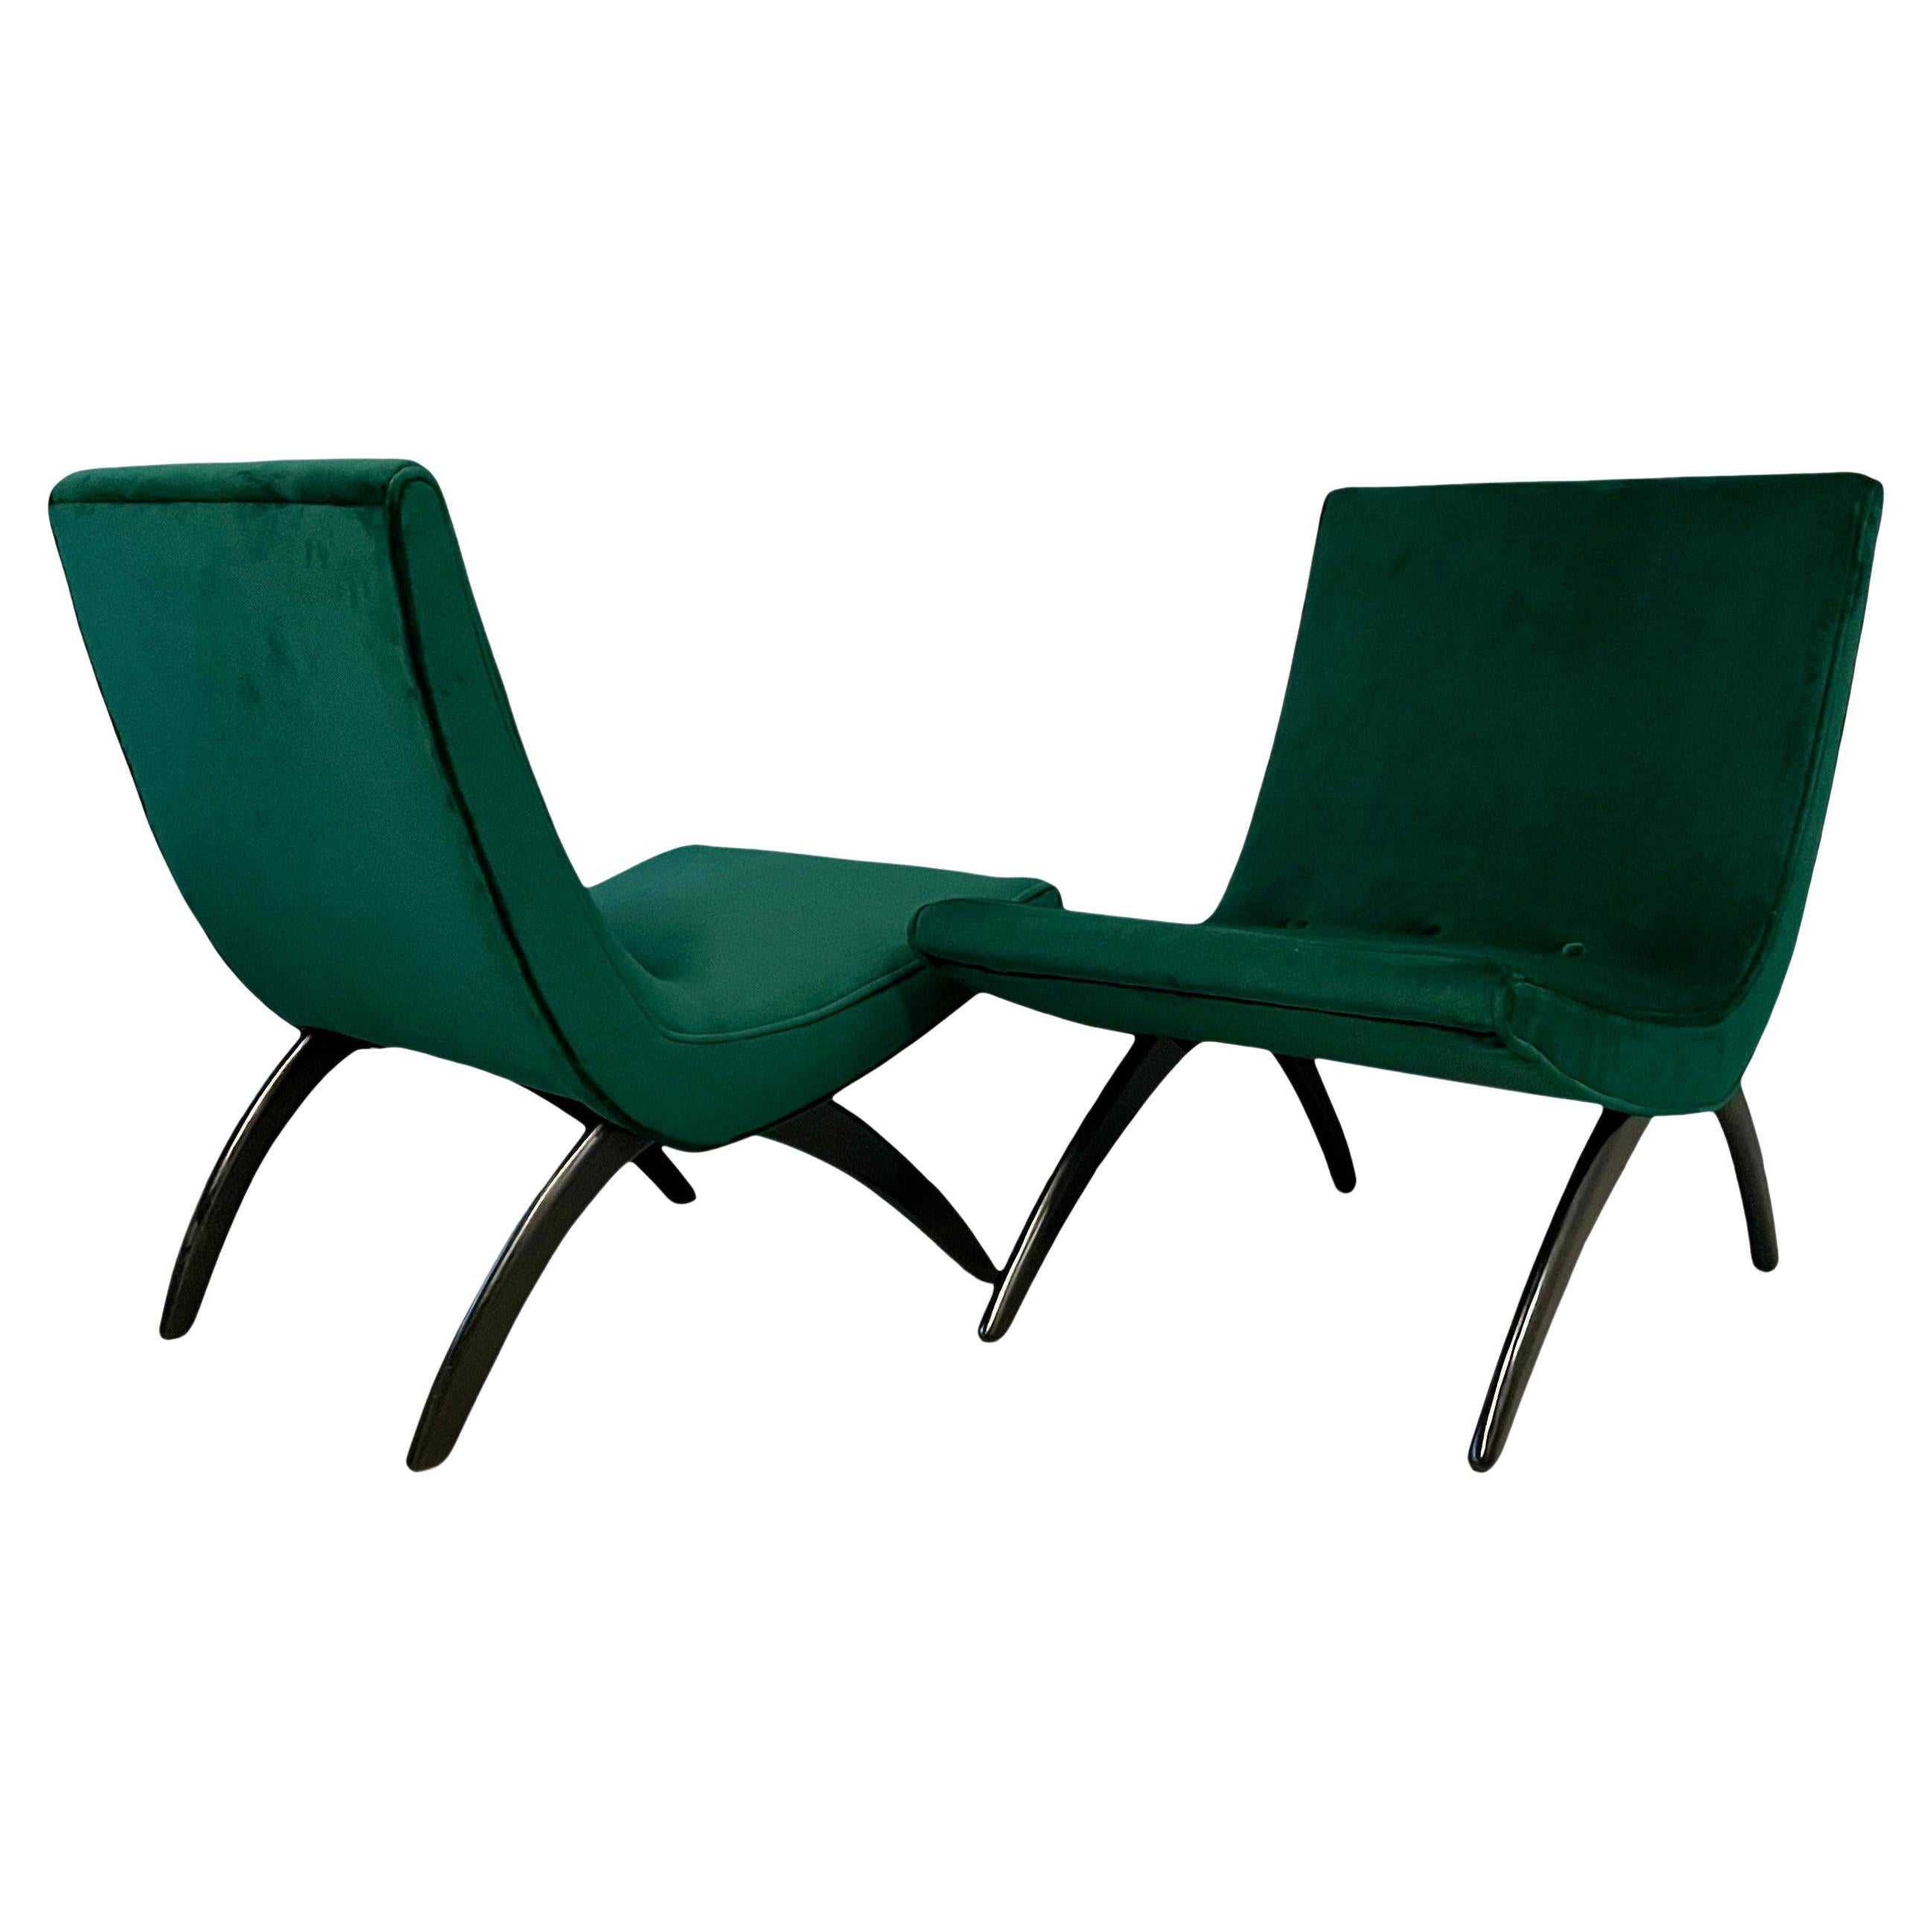 Iconic and early scoop chairs with ebonized walnut legs and newly reupholstered in a beautiful emerald green velvet makes this pair of chairs spectacular! This is a chair that you don't see very often.